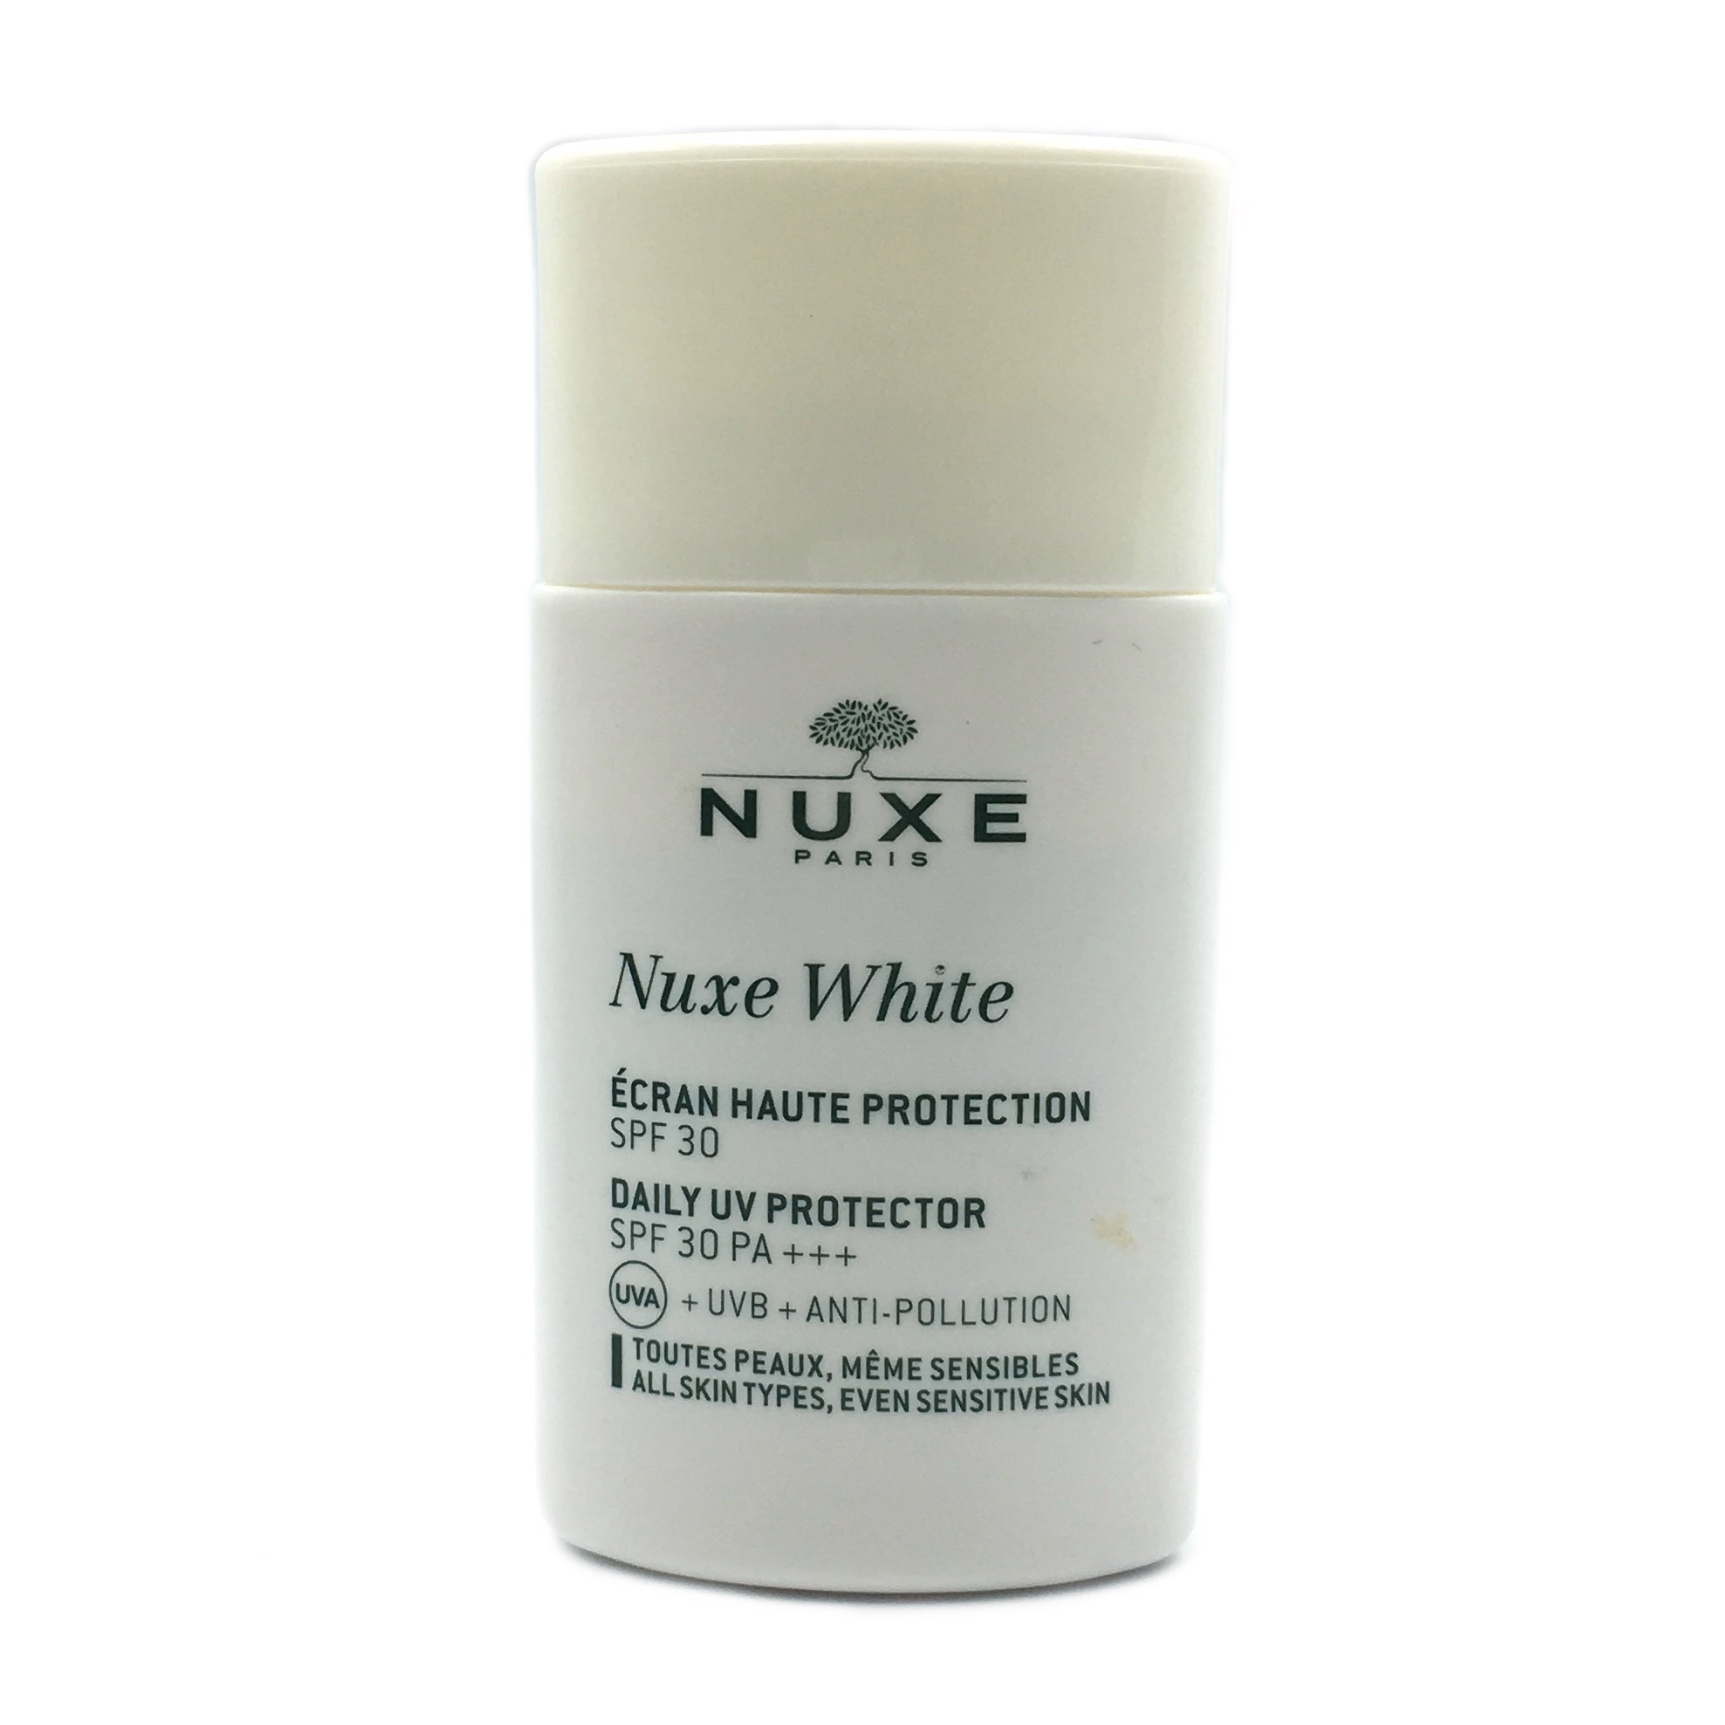 Nuxe Daily Uv Protector Faces